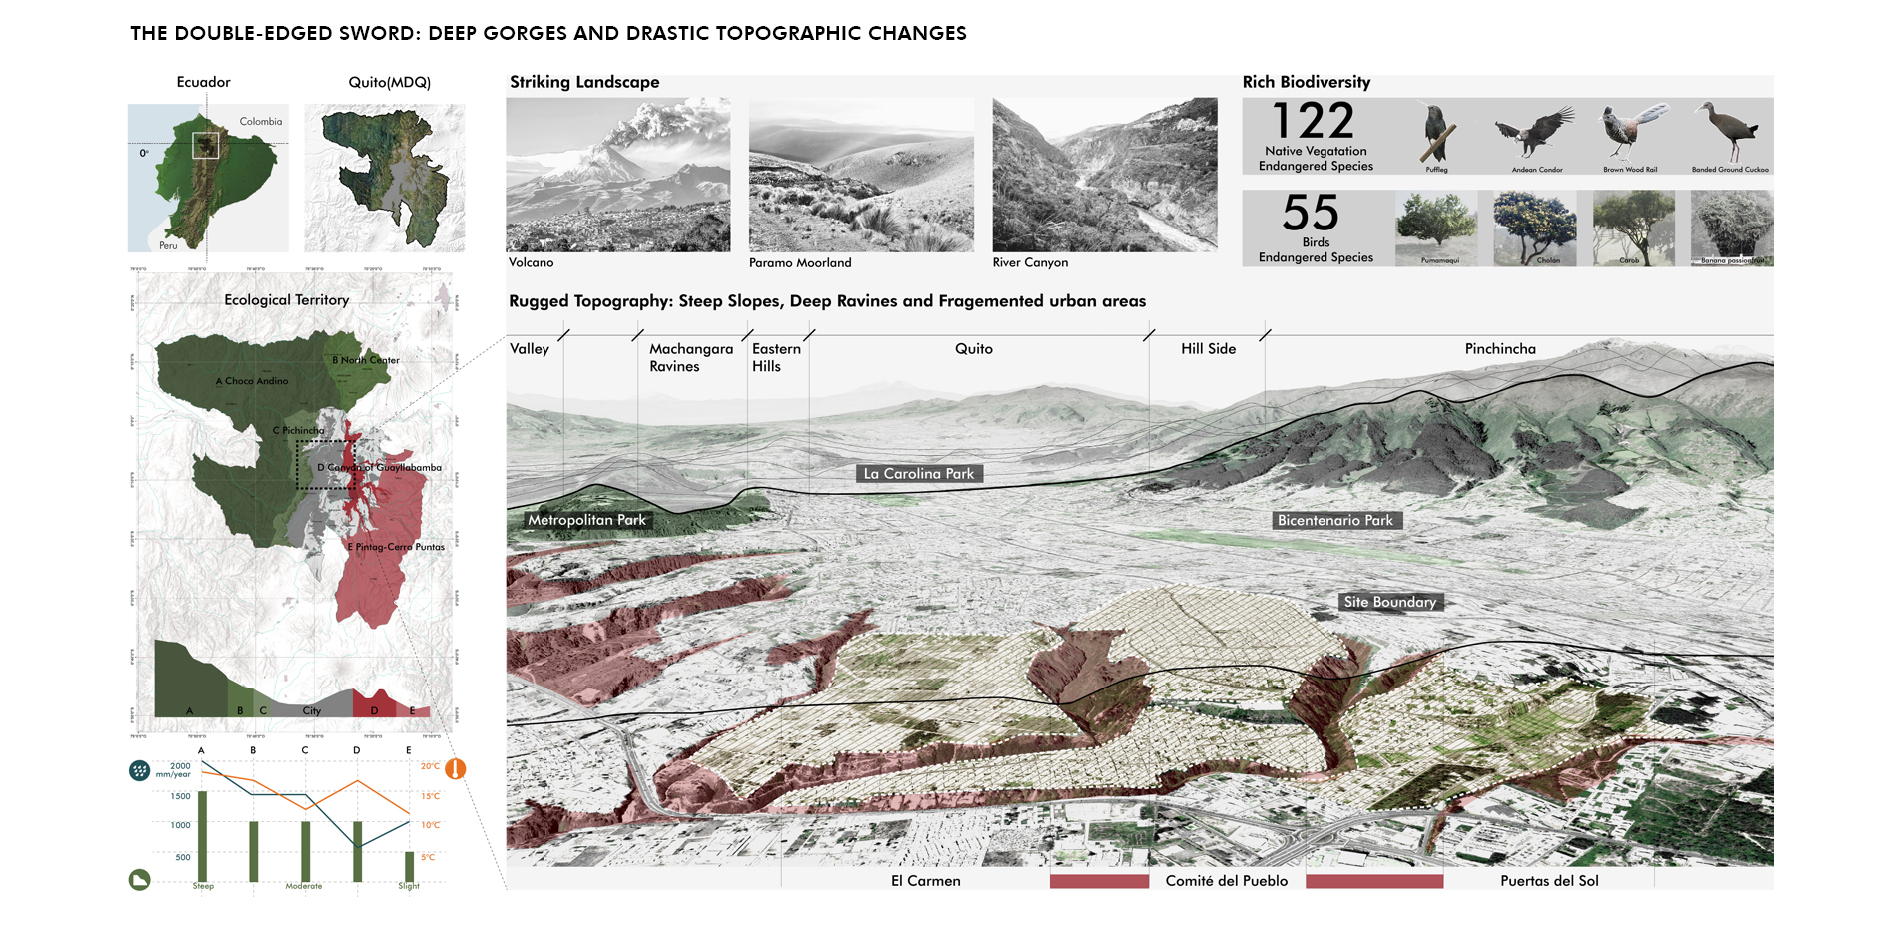 The Double-Edged Sword: Deep Gorges and Drastic Topographic Changes